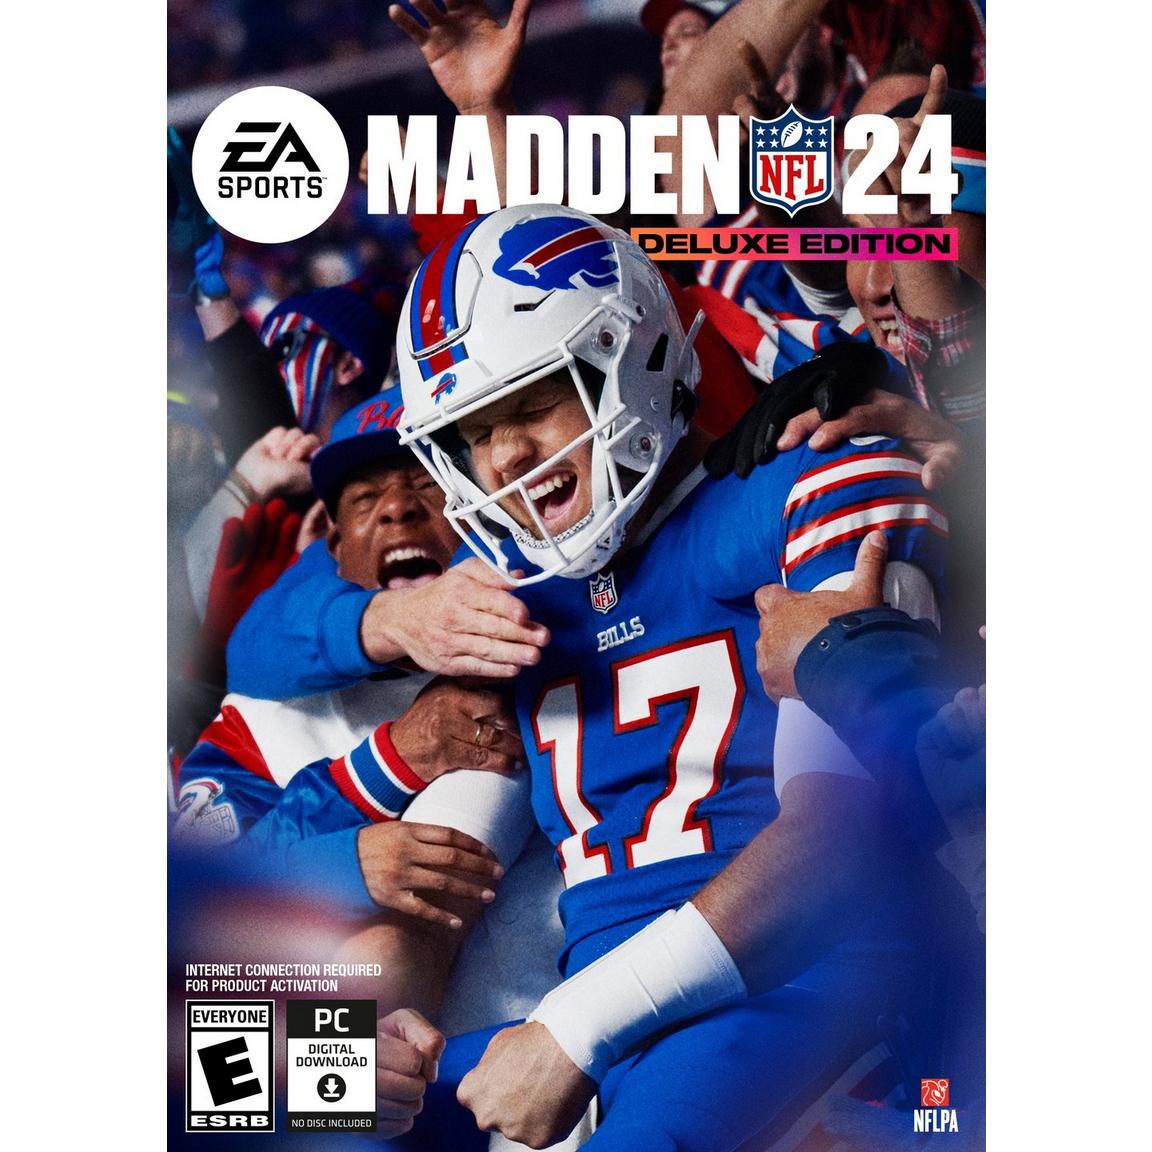 Madden NFL 24 Deluxe Edition - PC EA app -  Electronic Arts, 1000000259